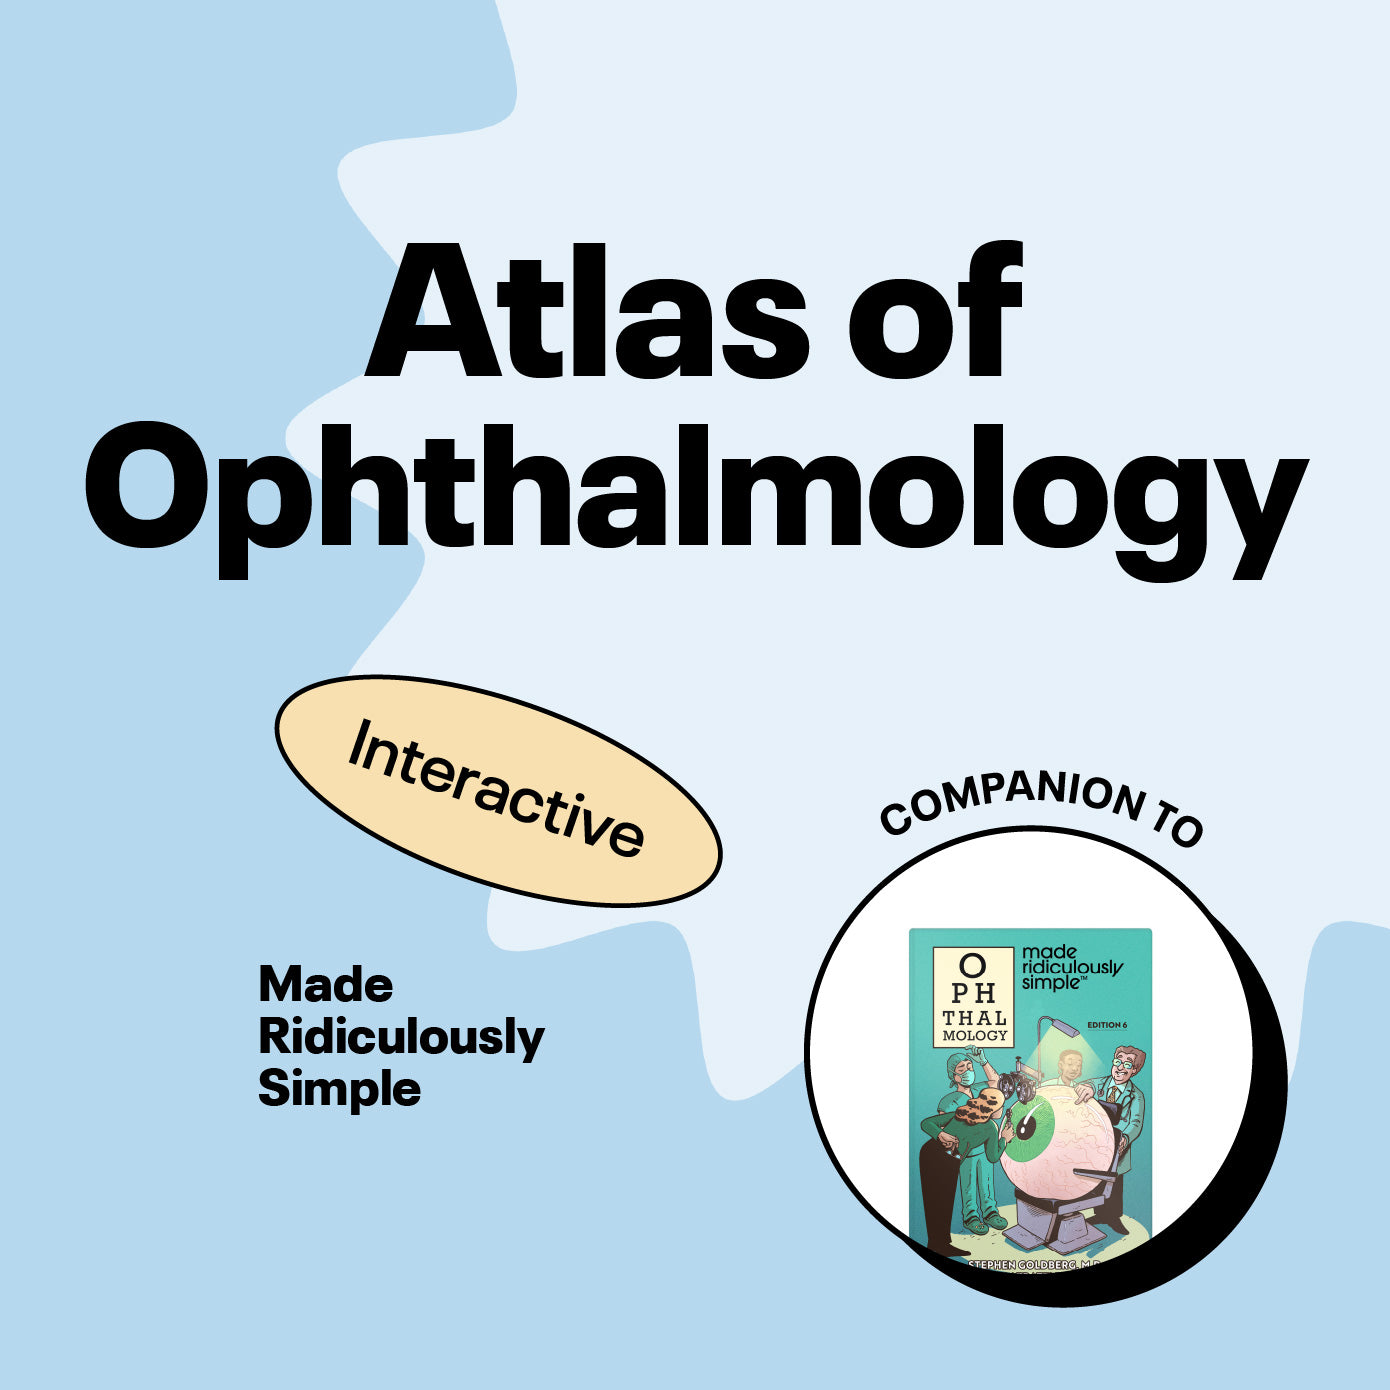 Ophthalmology Made Ridiculously Simple Interactive Atlas